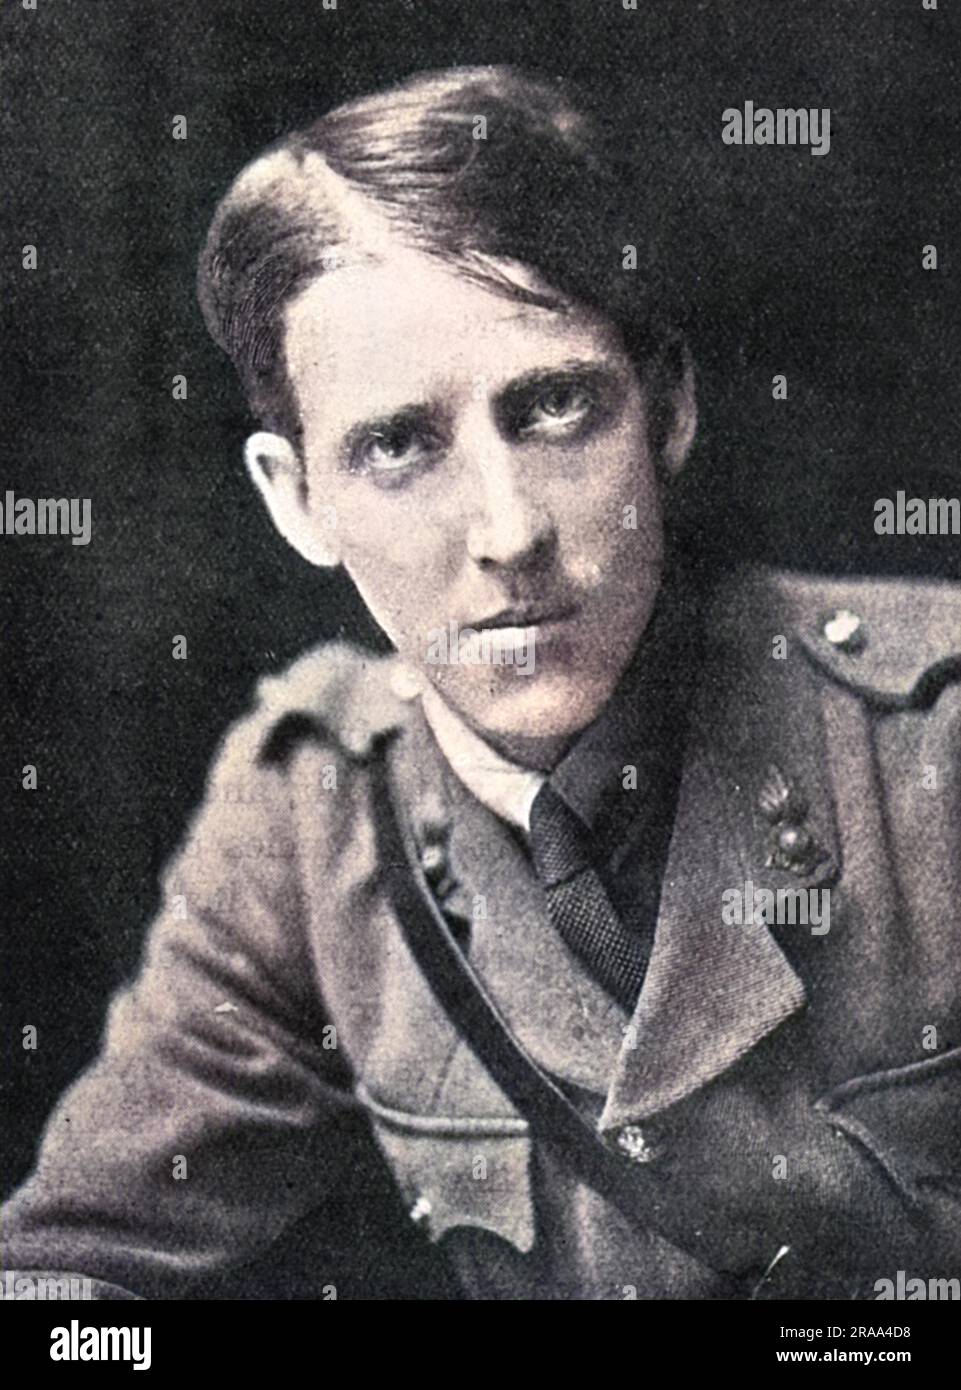 JACK COLLINGS SQUIRE writer and editor, noted for his parodies and pastiches : here as a soldier in World War One.     Date: 1884 - 1958 Stock Photo